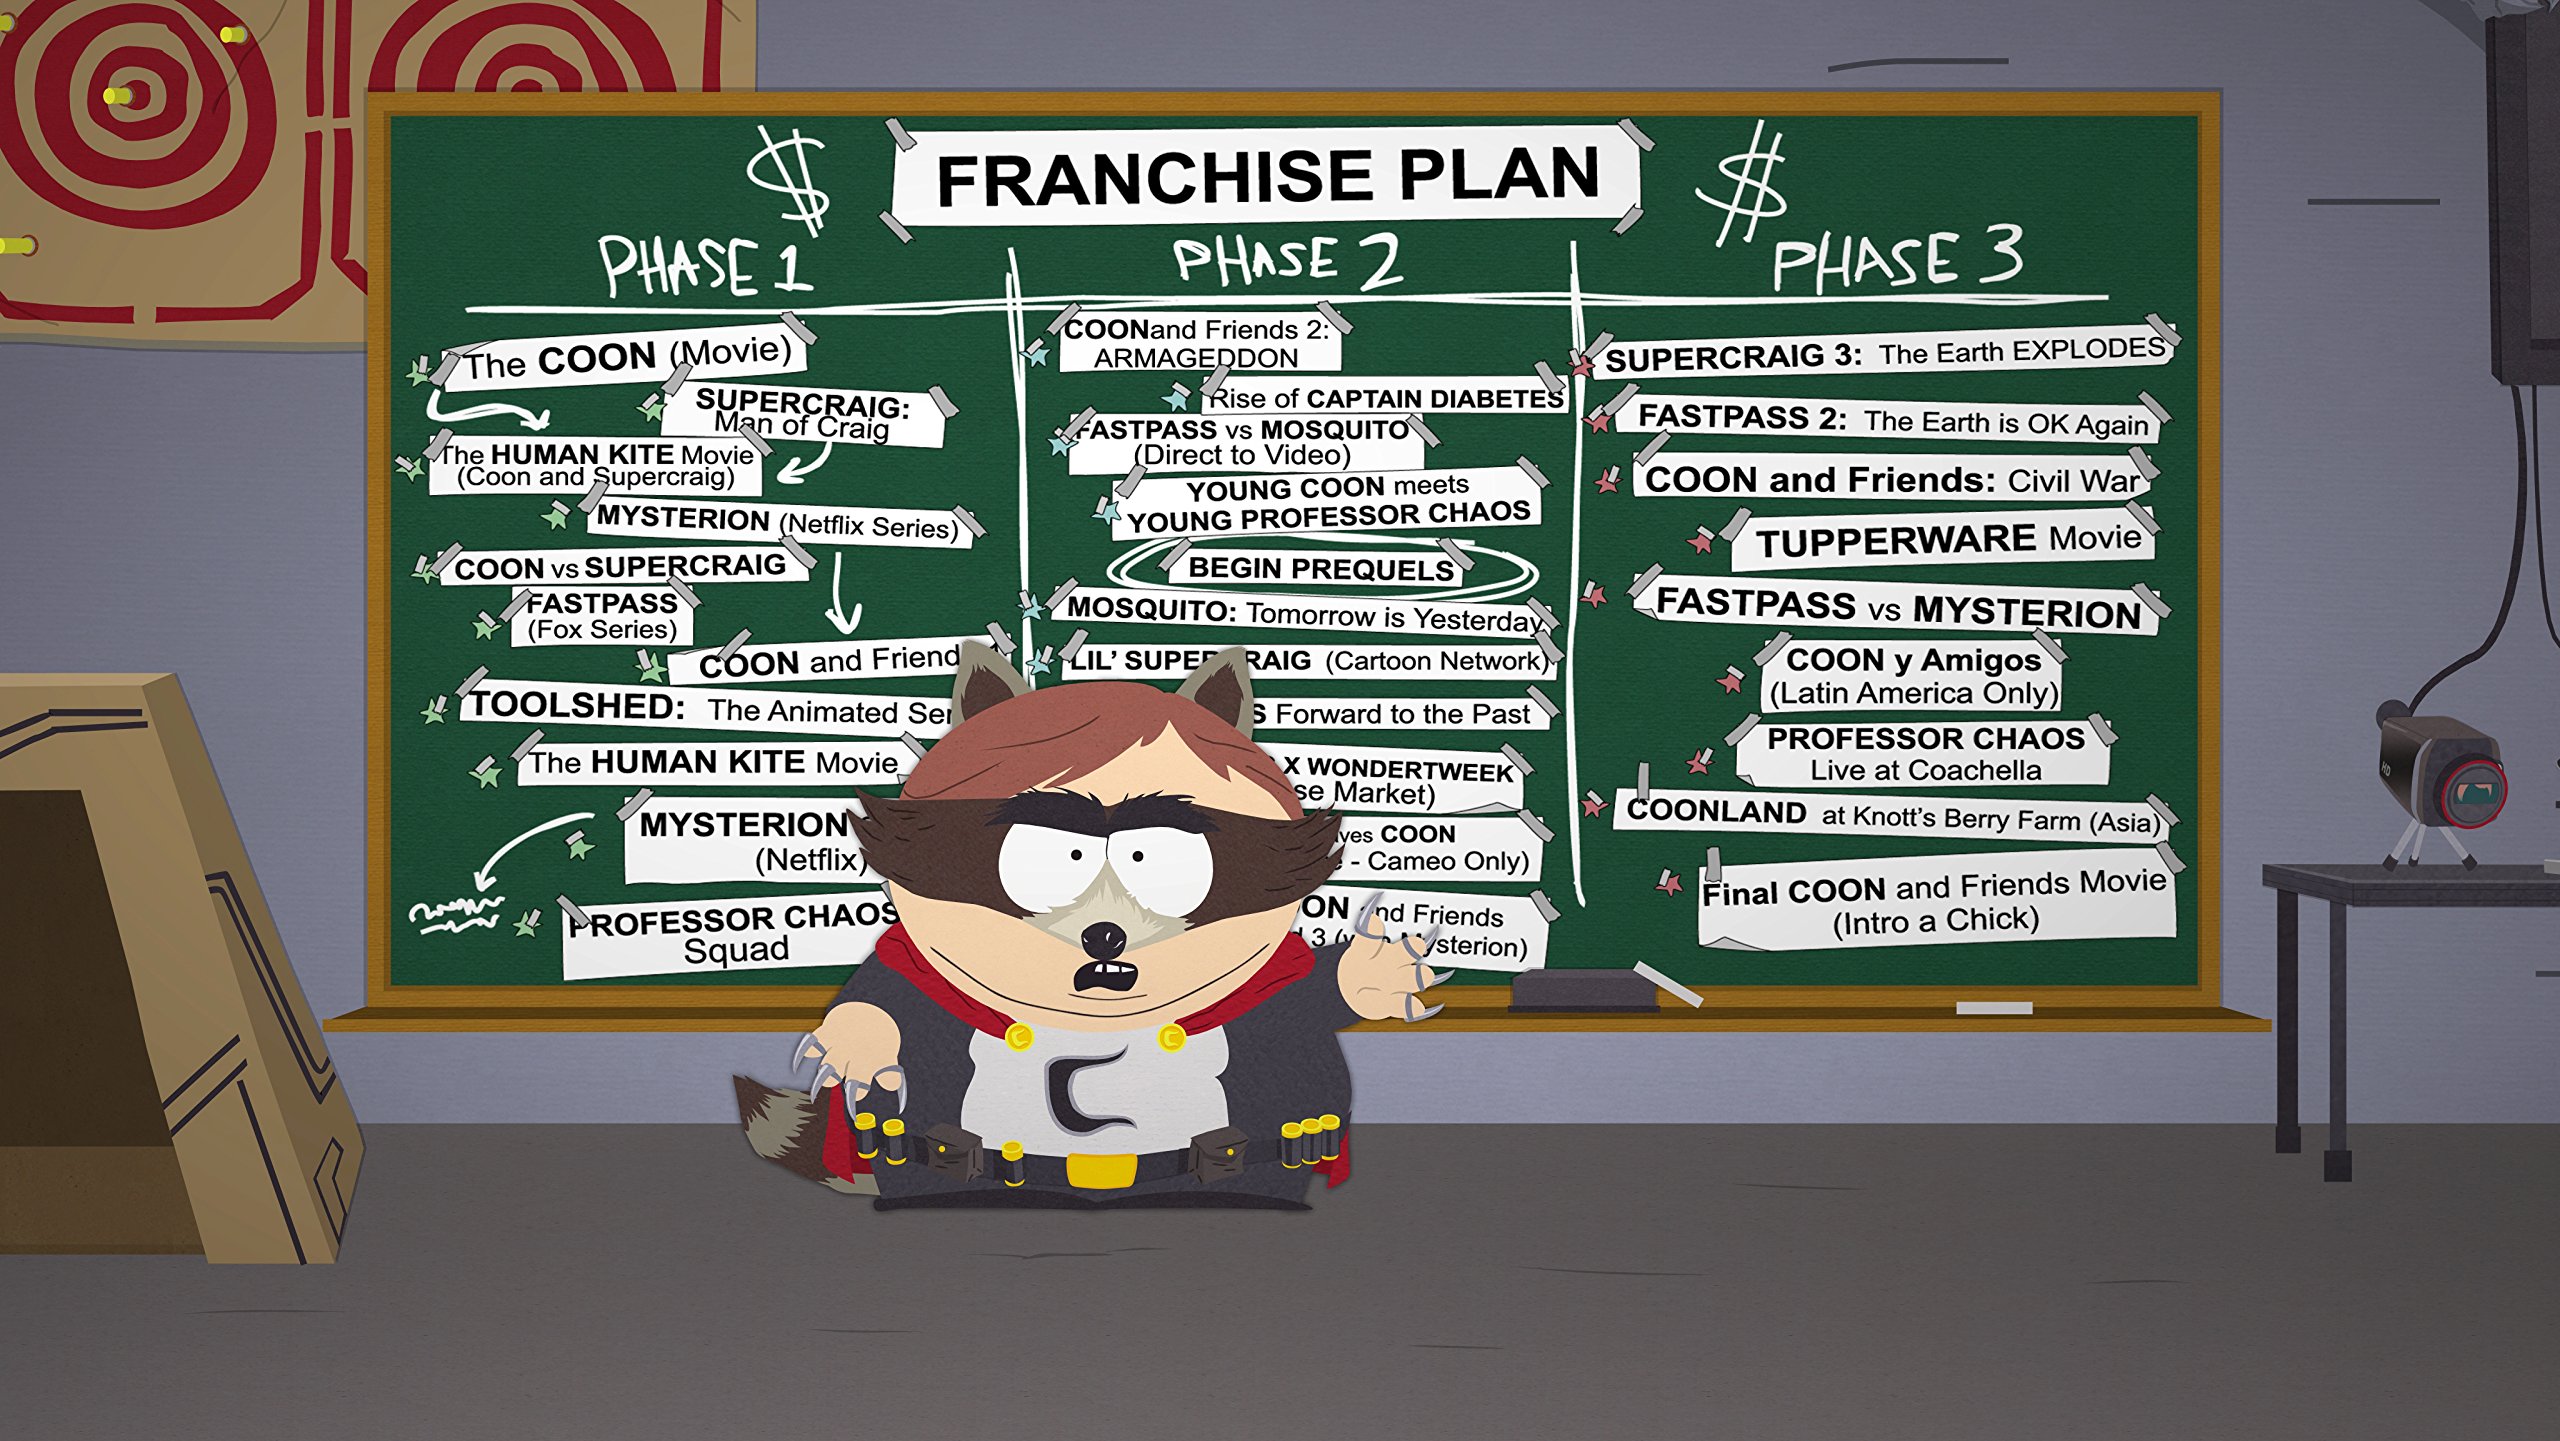 South Park: The Fractured but Whole - Gold Edition | PC Code - Ubisoft Connect